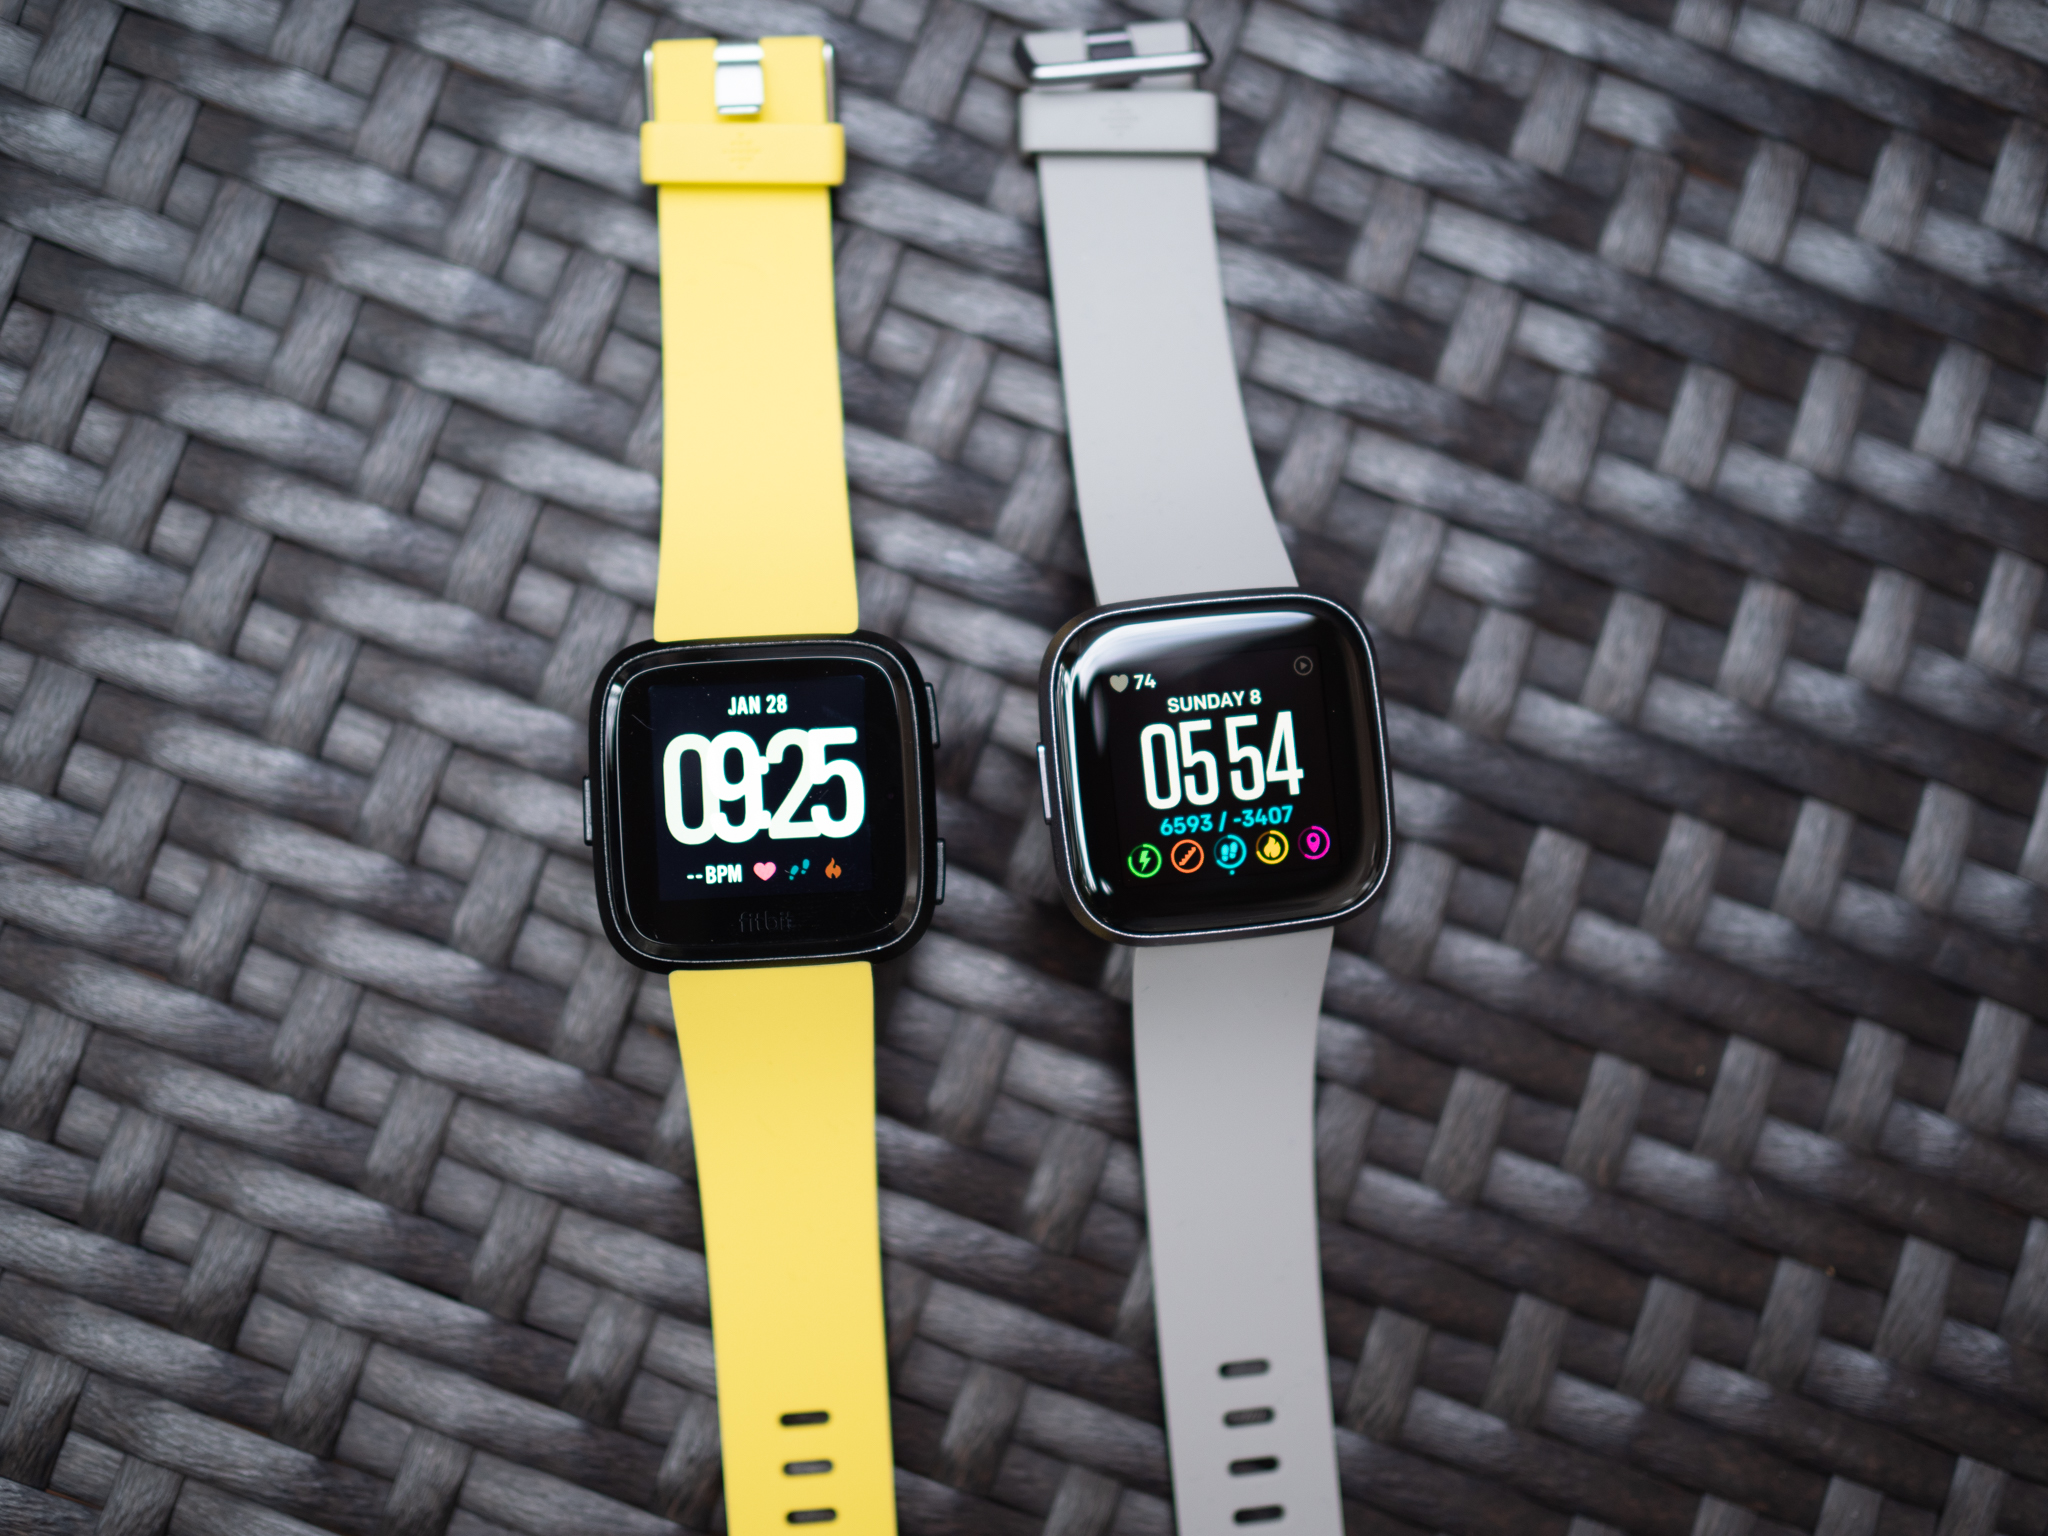 difference between versa and versa 2